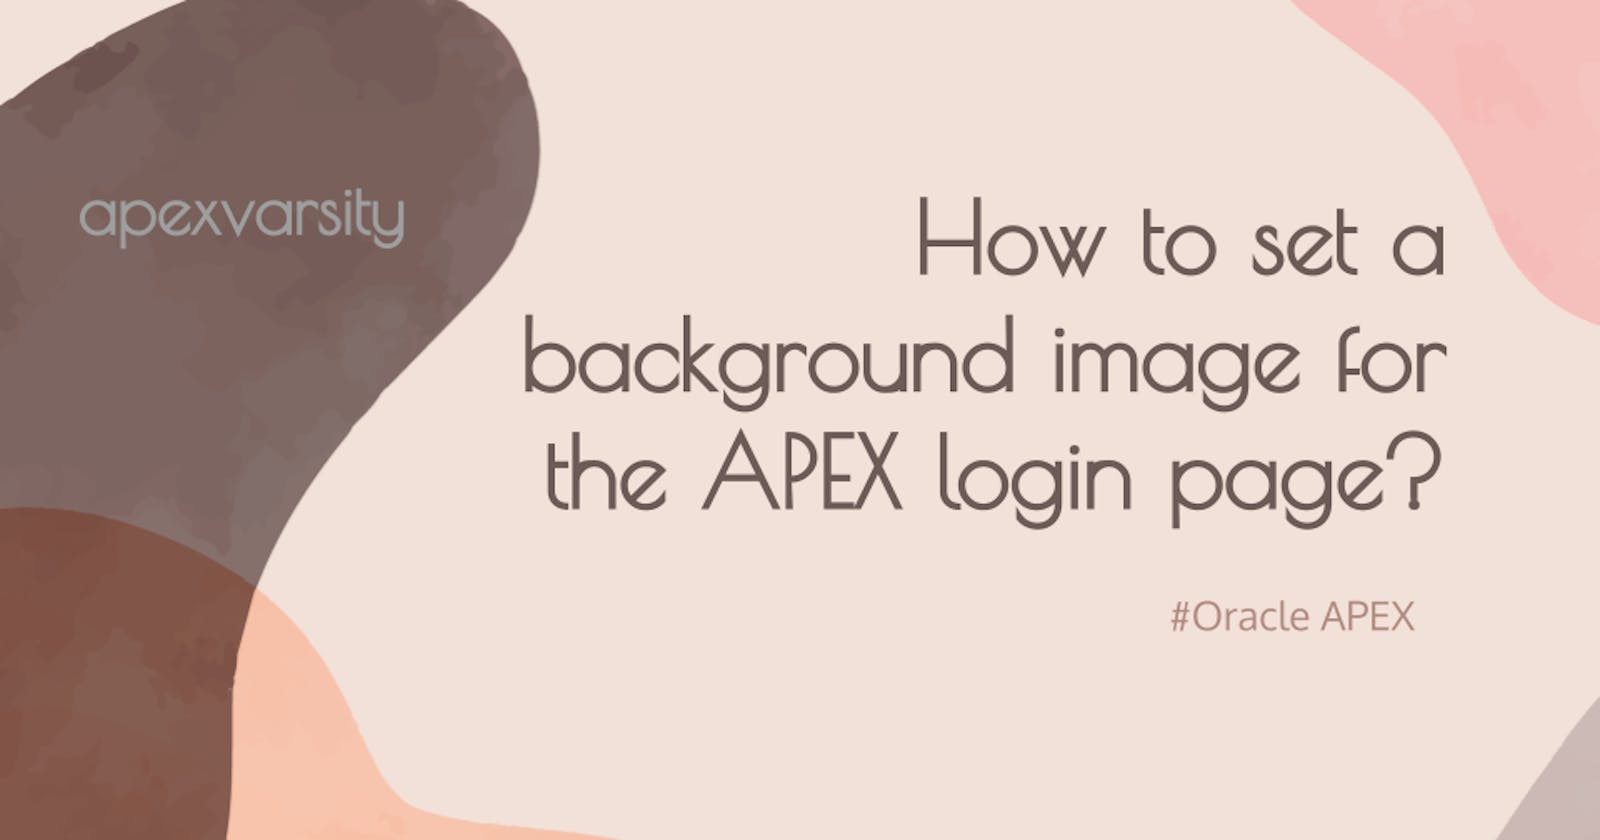 How to set a background image for the APEX login page?